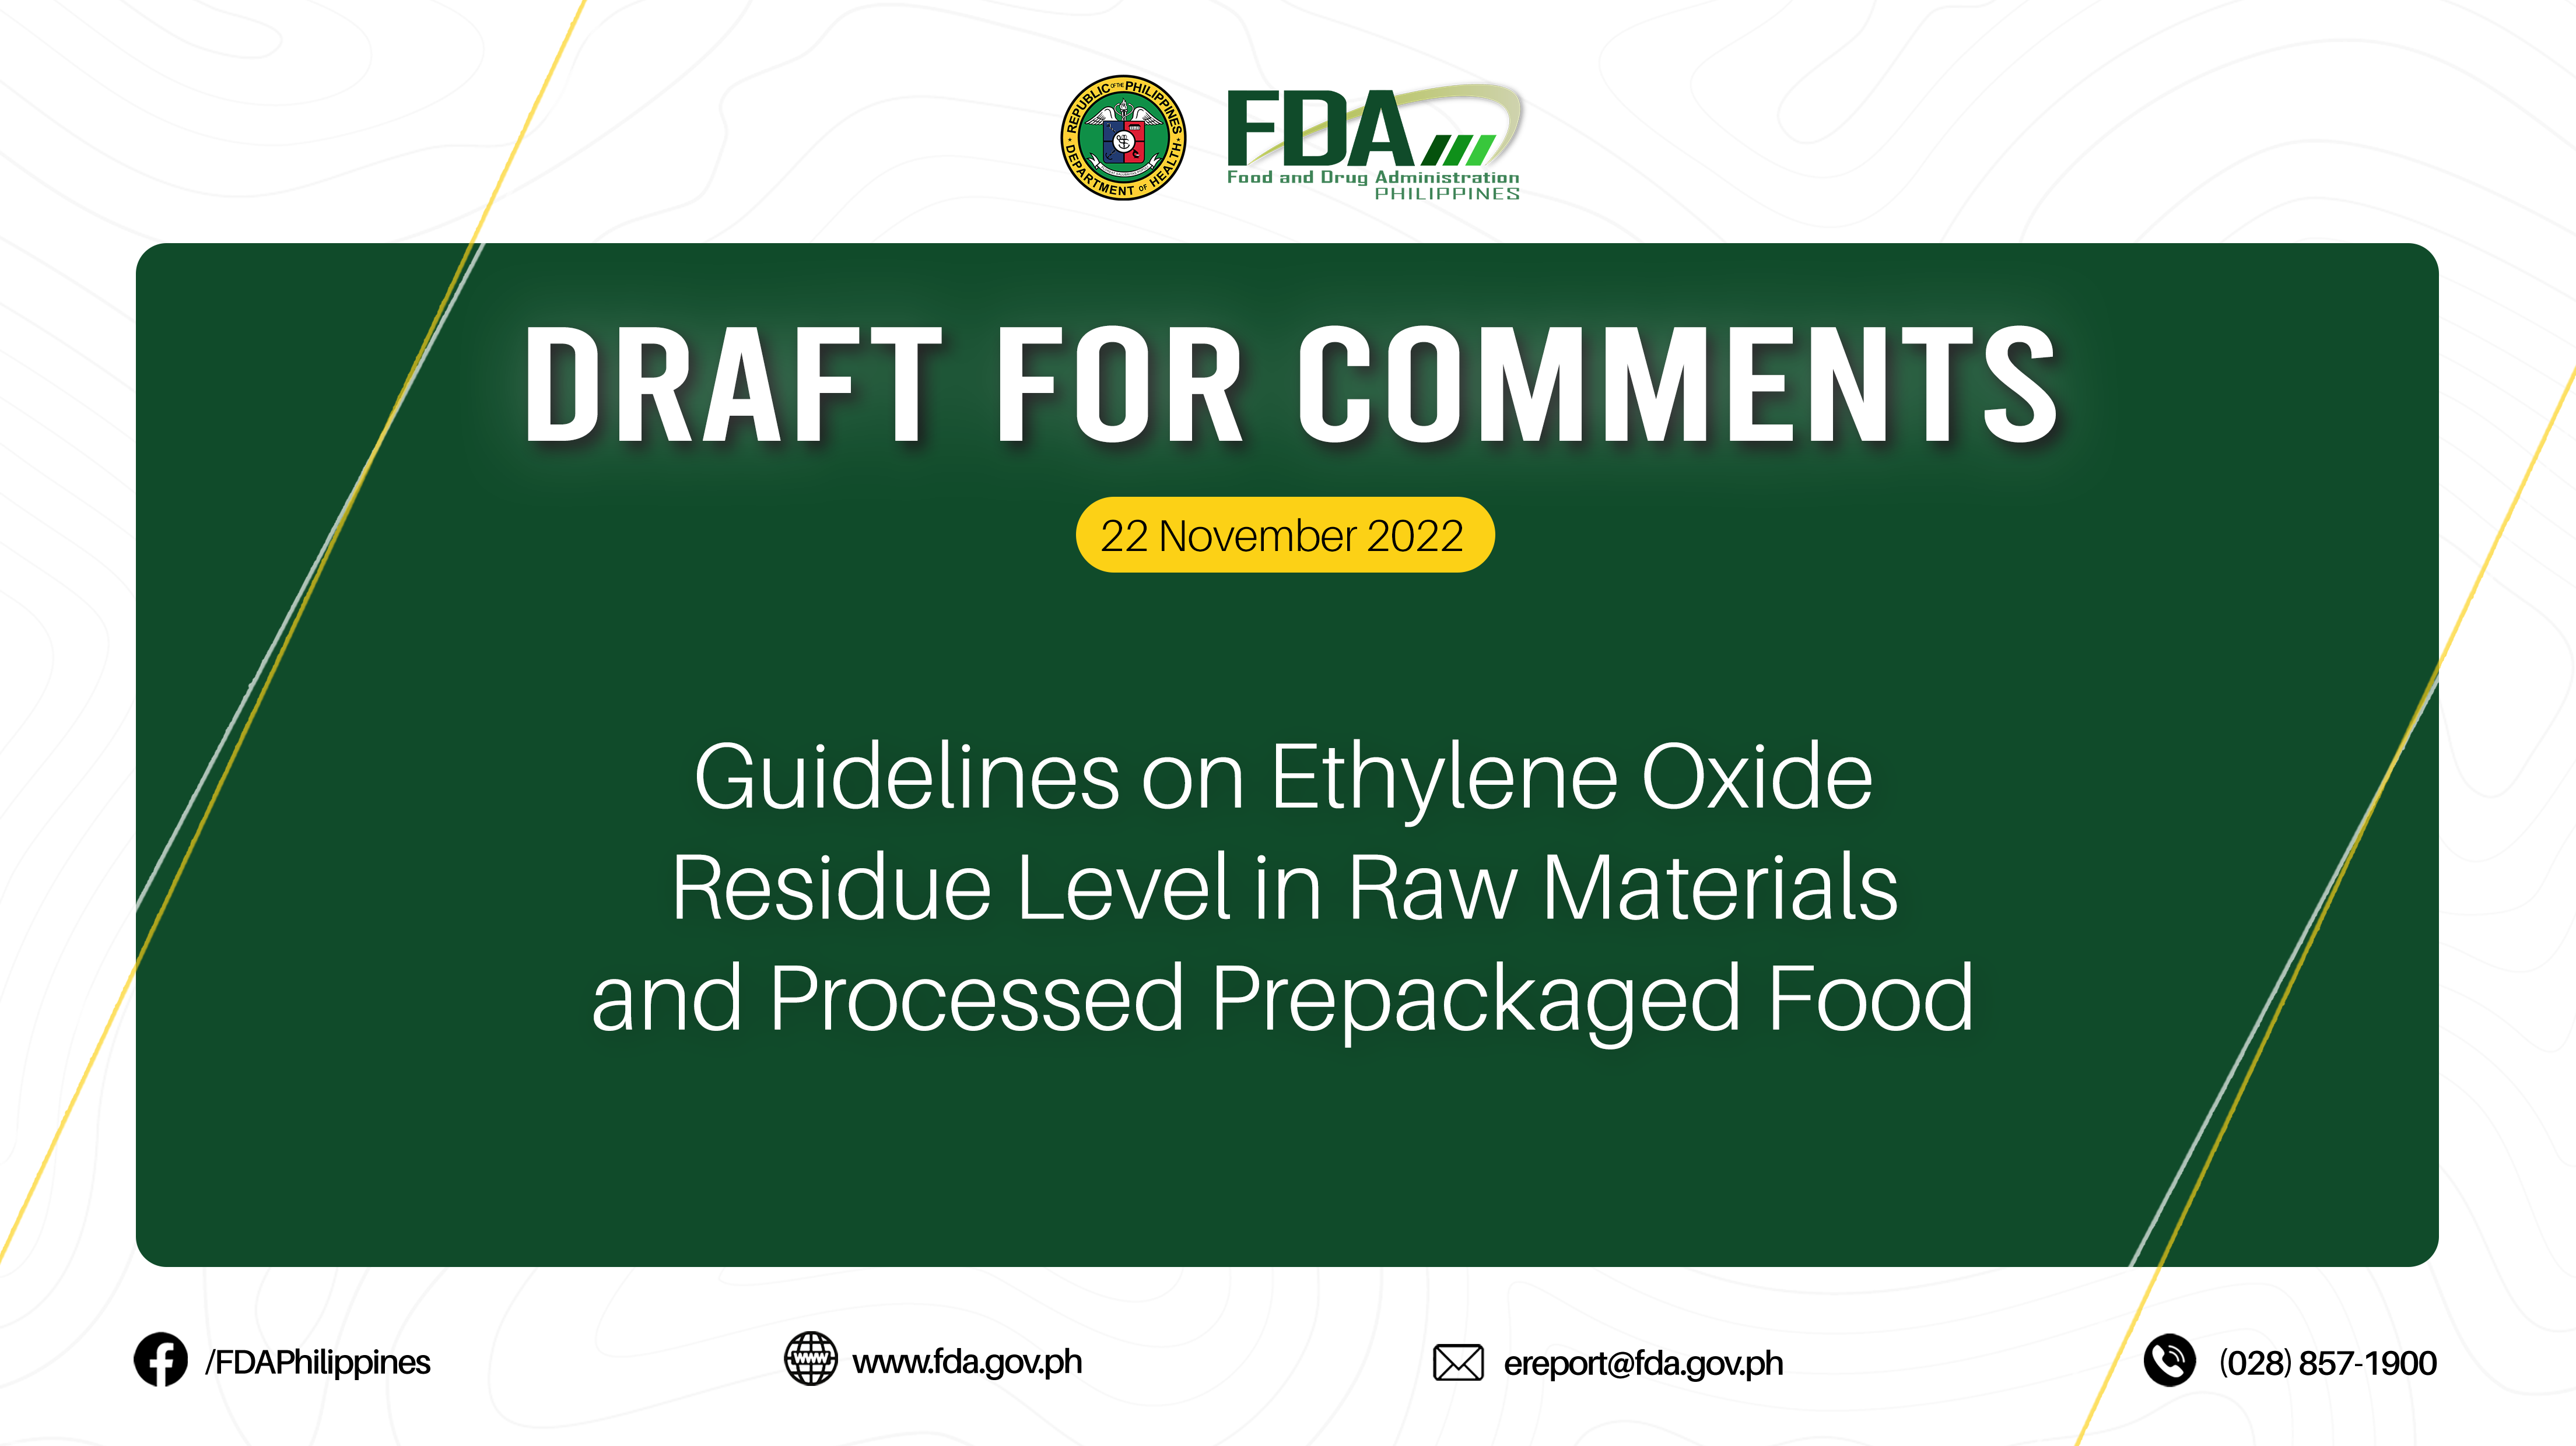 Draft for Comments || Guidelines on Ethylene Oxide Residue Level in Raw Materials and Processed Prepackaged Food